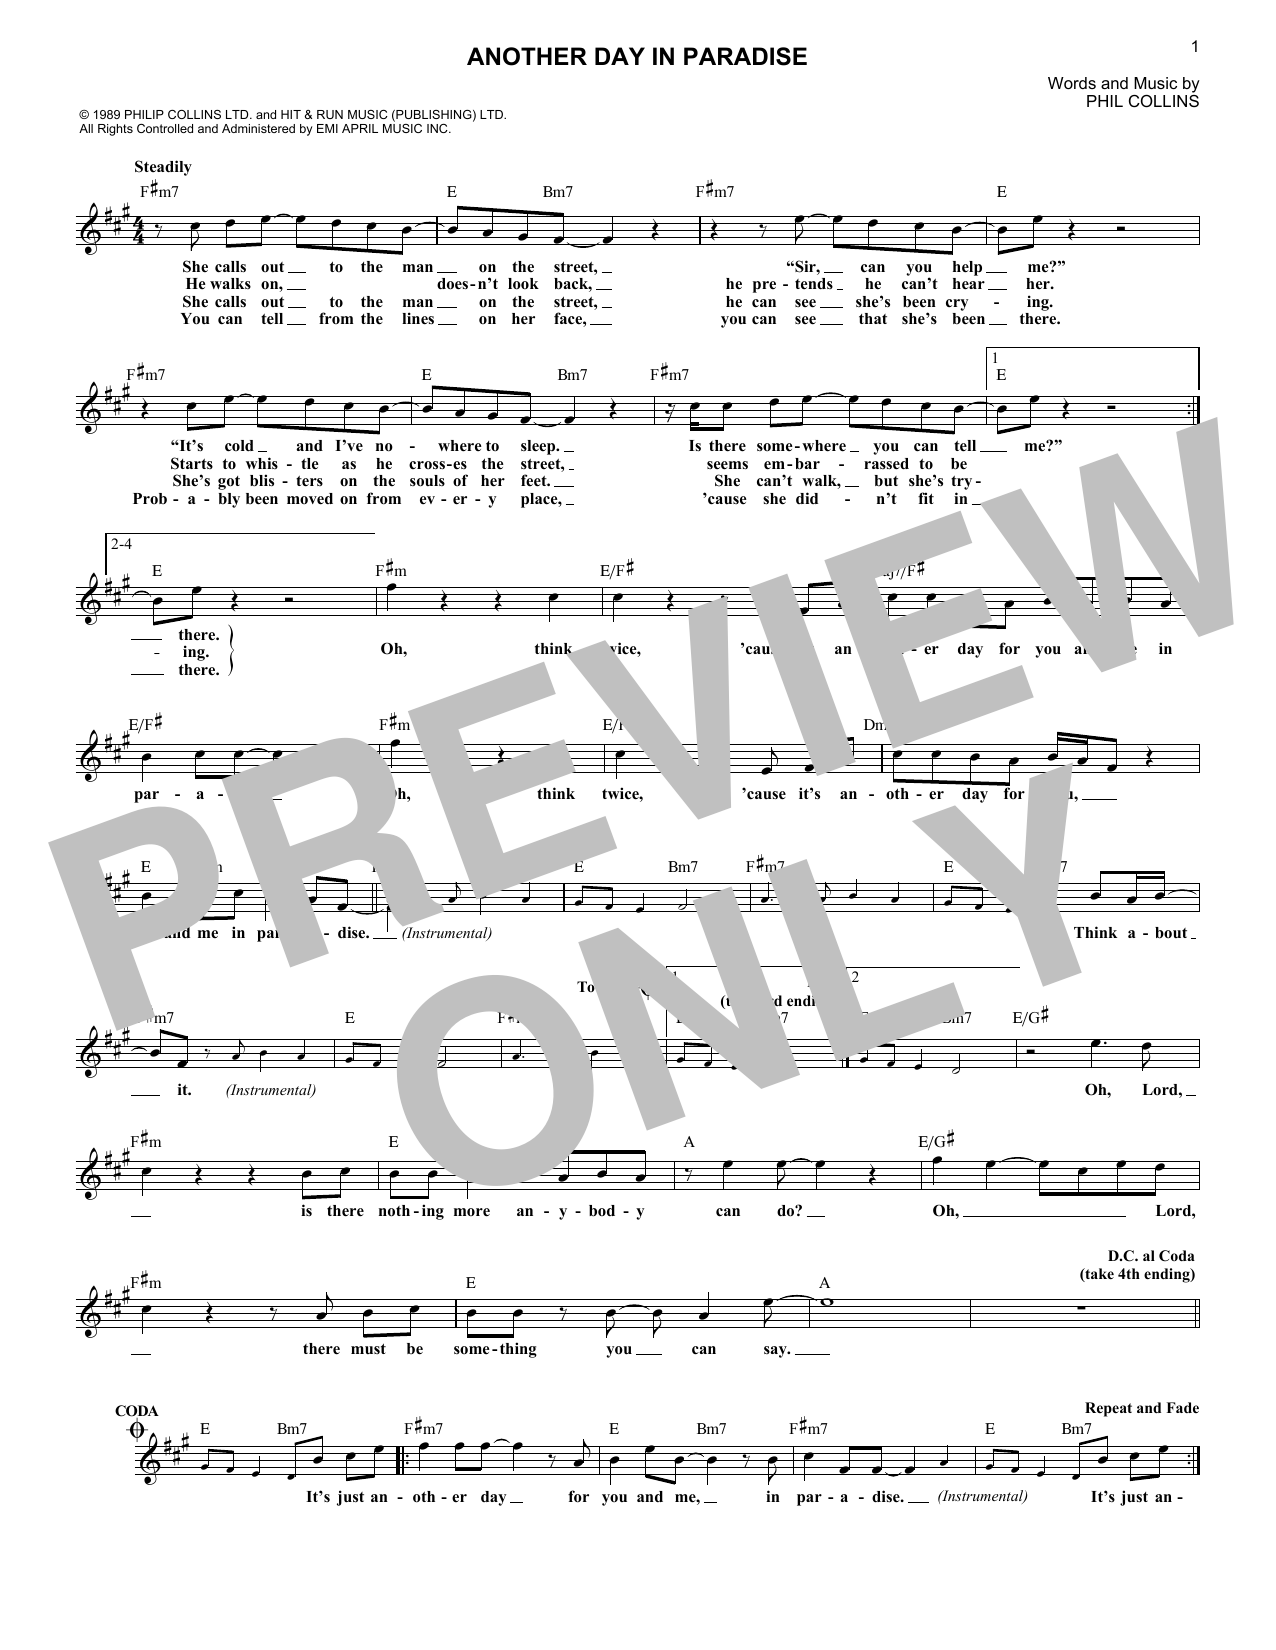 Download Phil Collins Another Day In Paradise Sheet Music